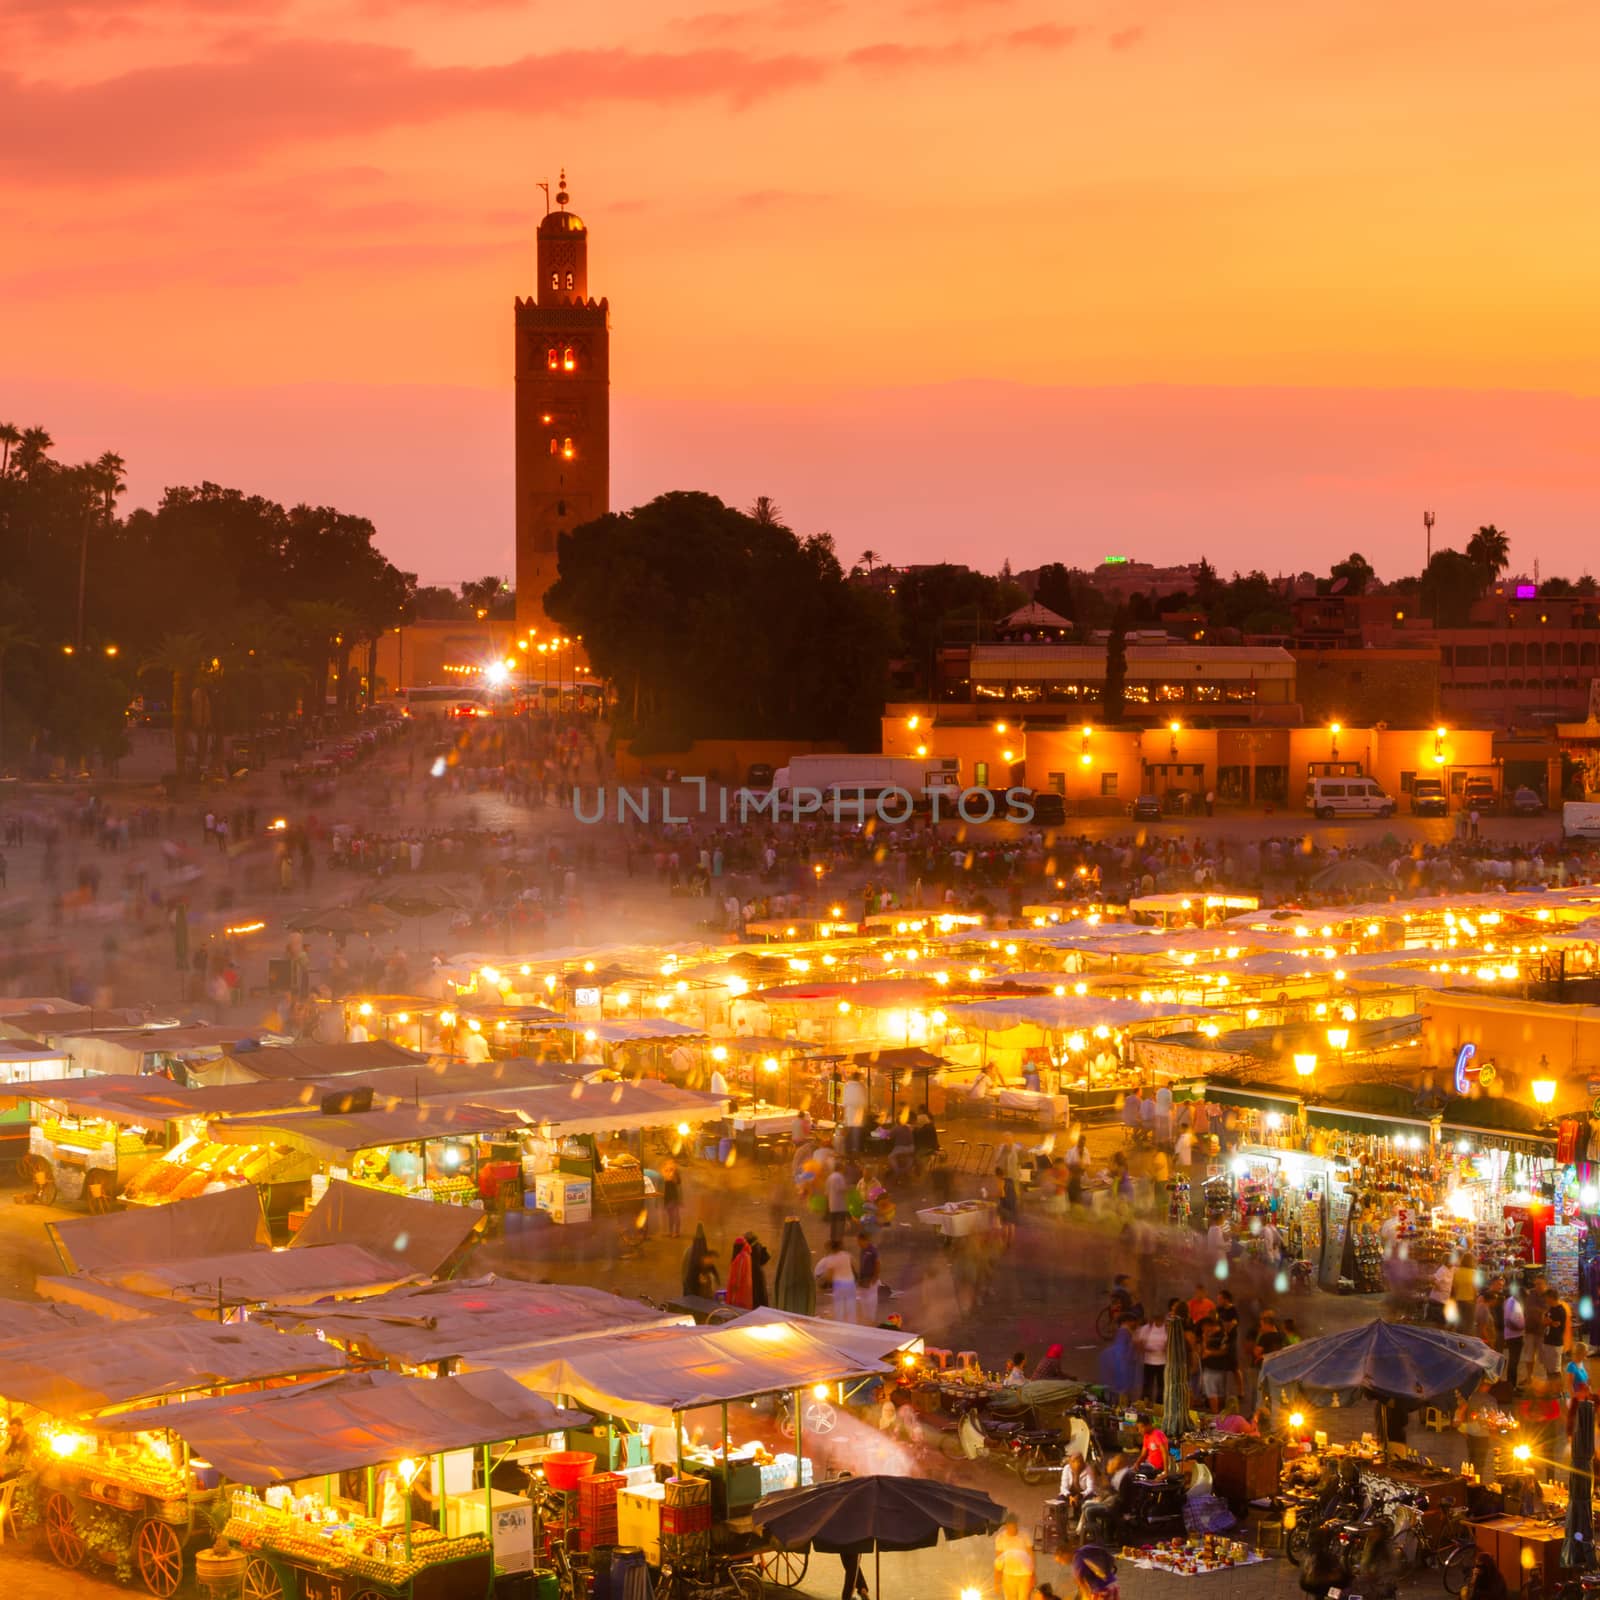 Jamaa el Fna also Jemaa el-Fnaa, Djema el-Fna or Djemaa el-Fnaa is a square and market place in Marrakesh, Morocco, Africa. UNESCO Masterpiece of the Oral and Intangible Heritage of Humanity.